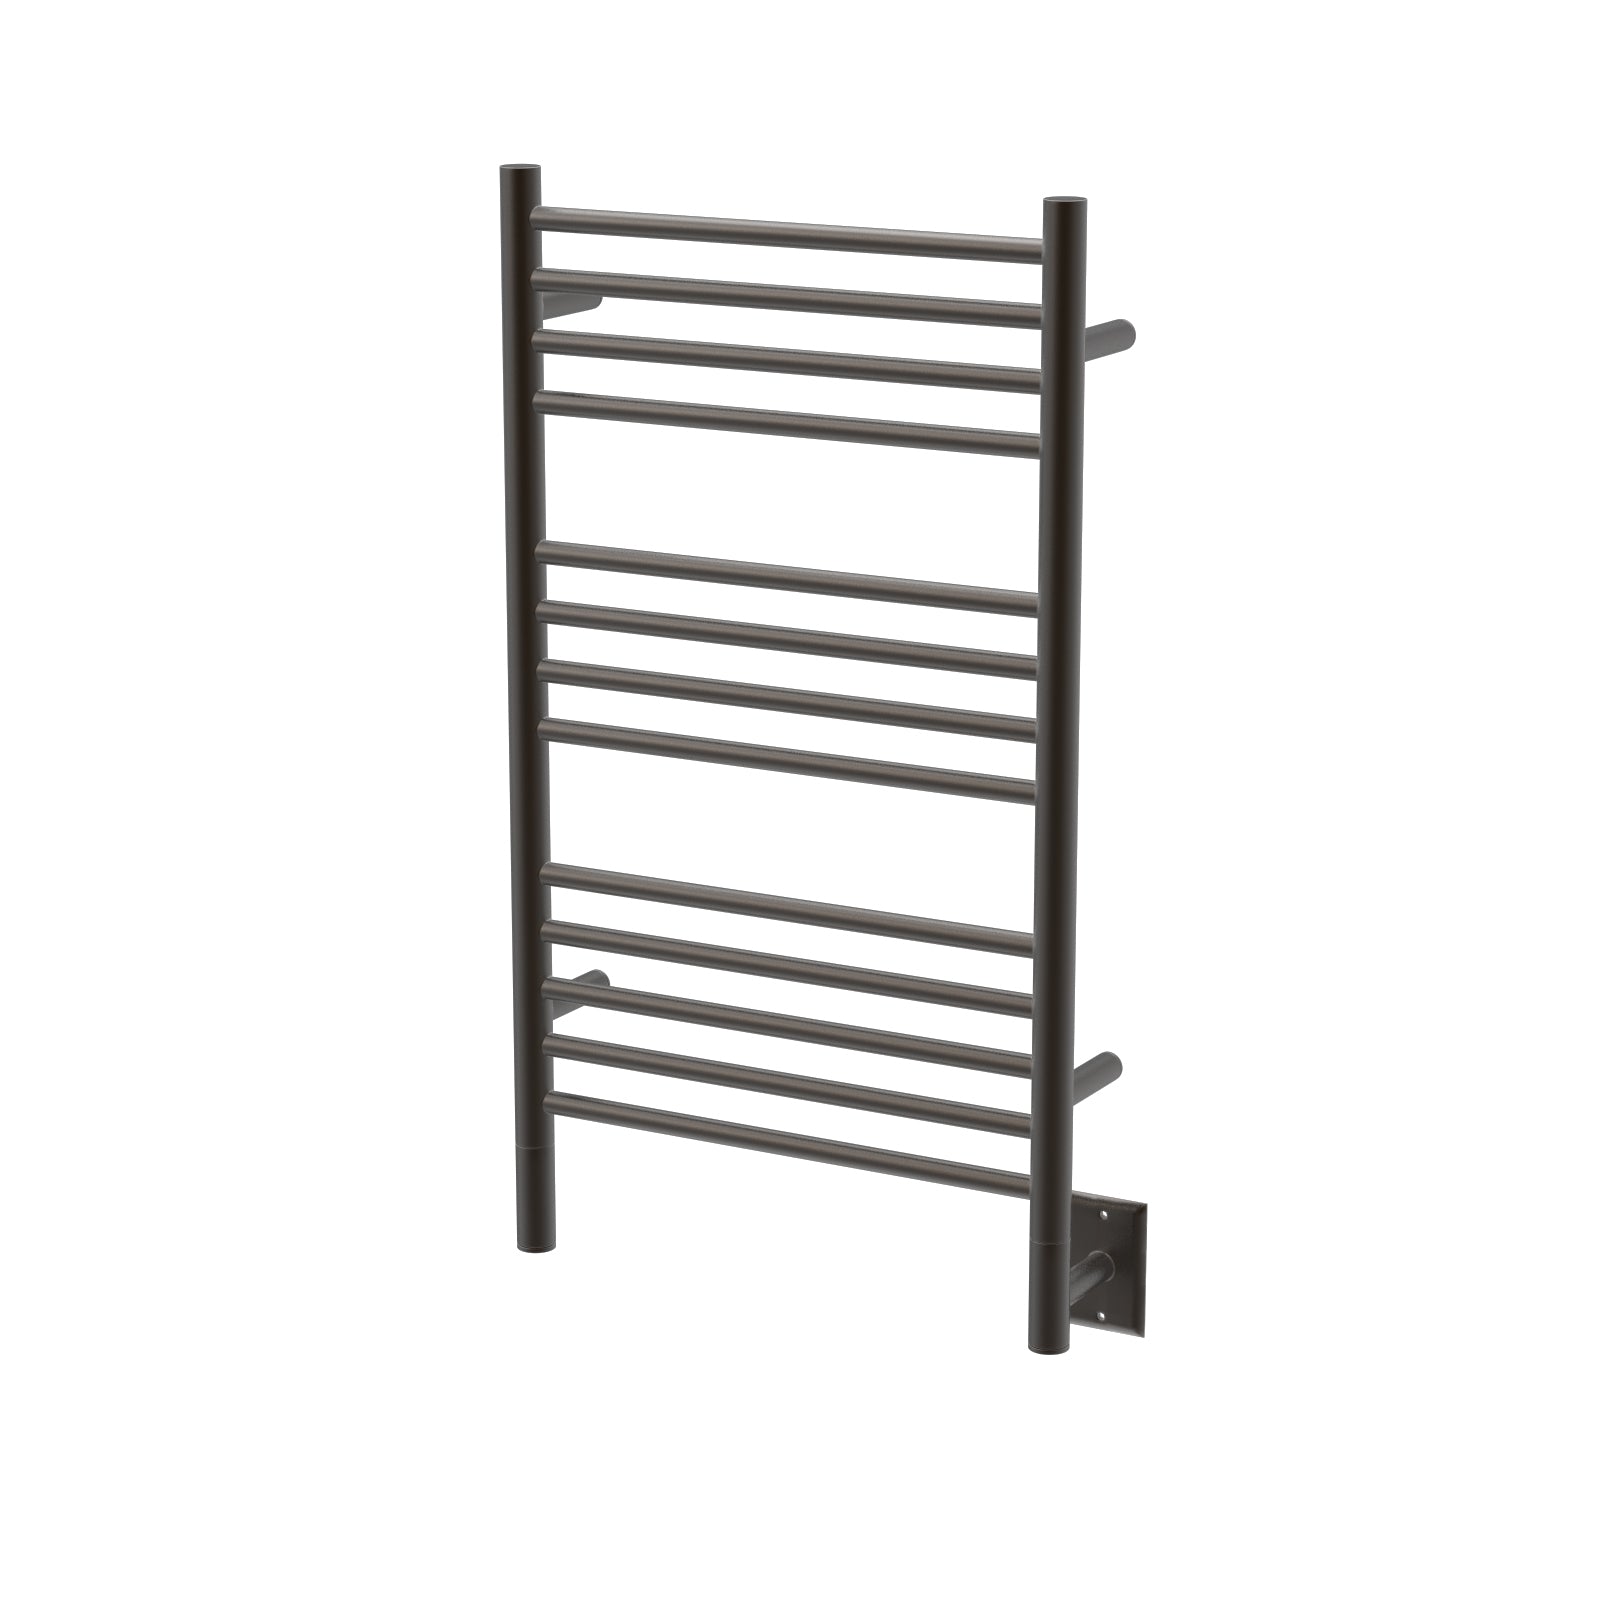 Oil Rubbed Bronze Towel Warmer, Amba Jeeves C Straight, Hardwired, 13 Bars, W 21" H 36"